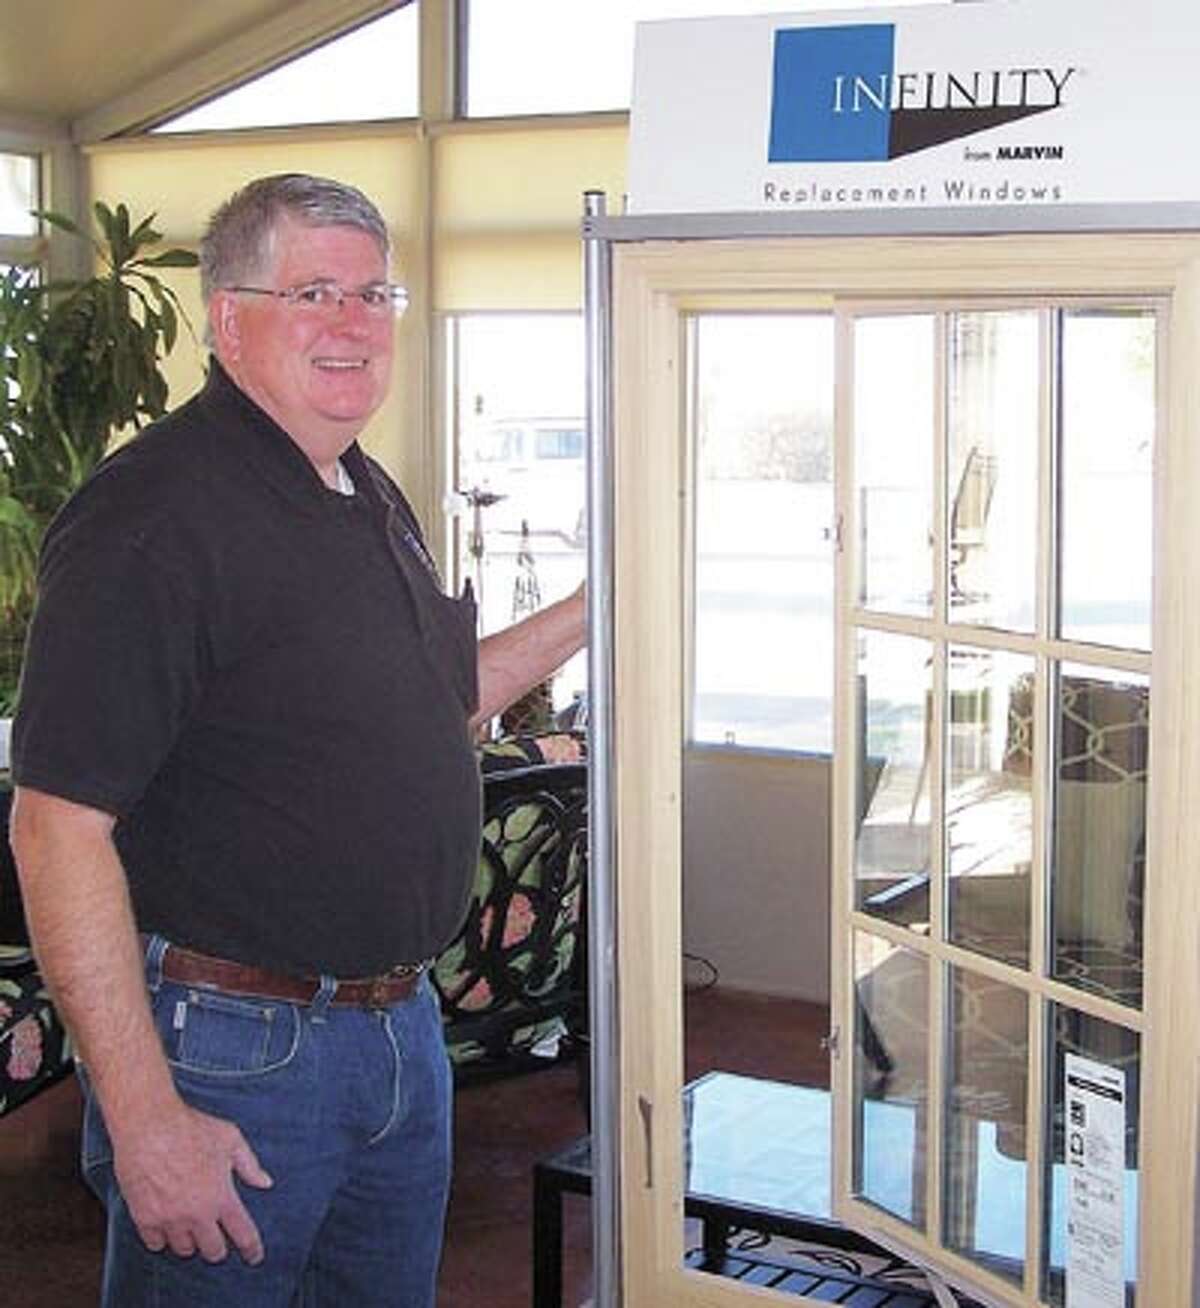 American Home Improvement’s Rodney Martin invites you to their anniversary open house this Saturday from 10-4. You can save 15 percent off the cost of Marvin Infinity windows like these.